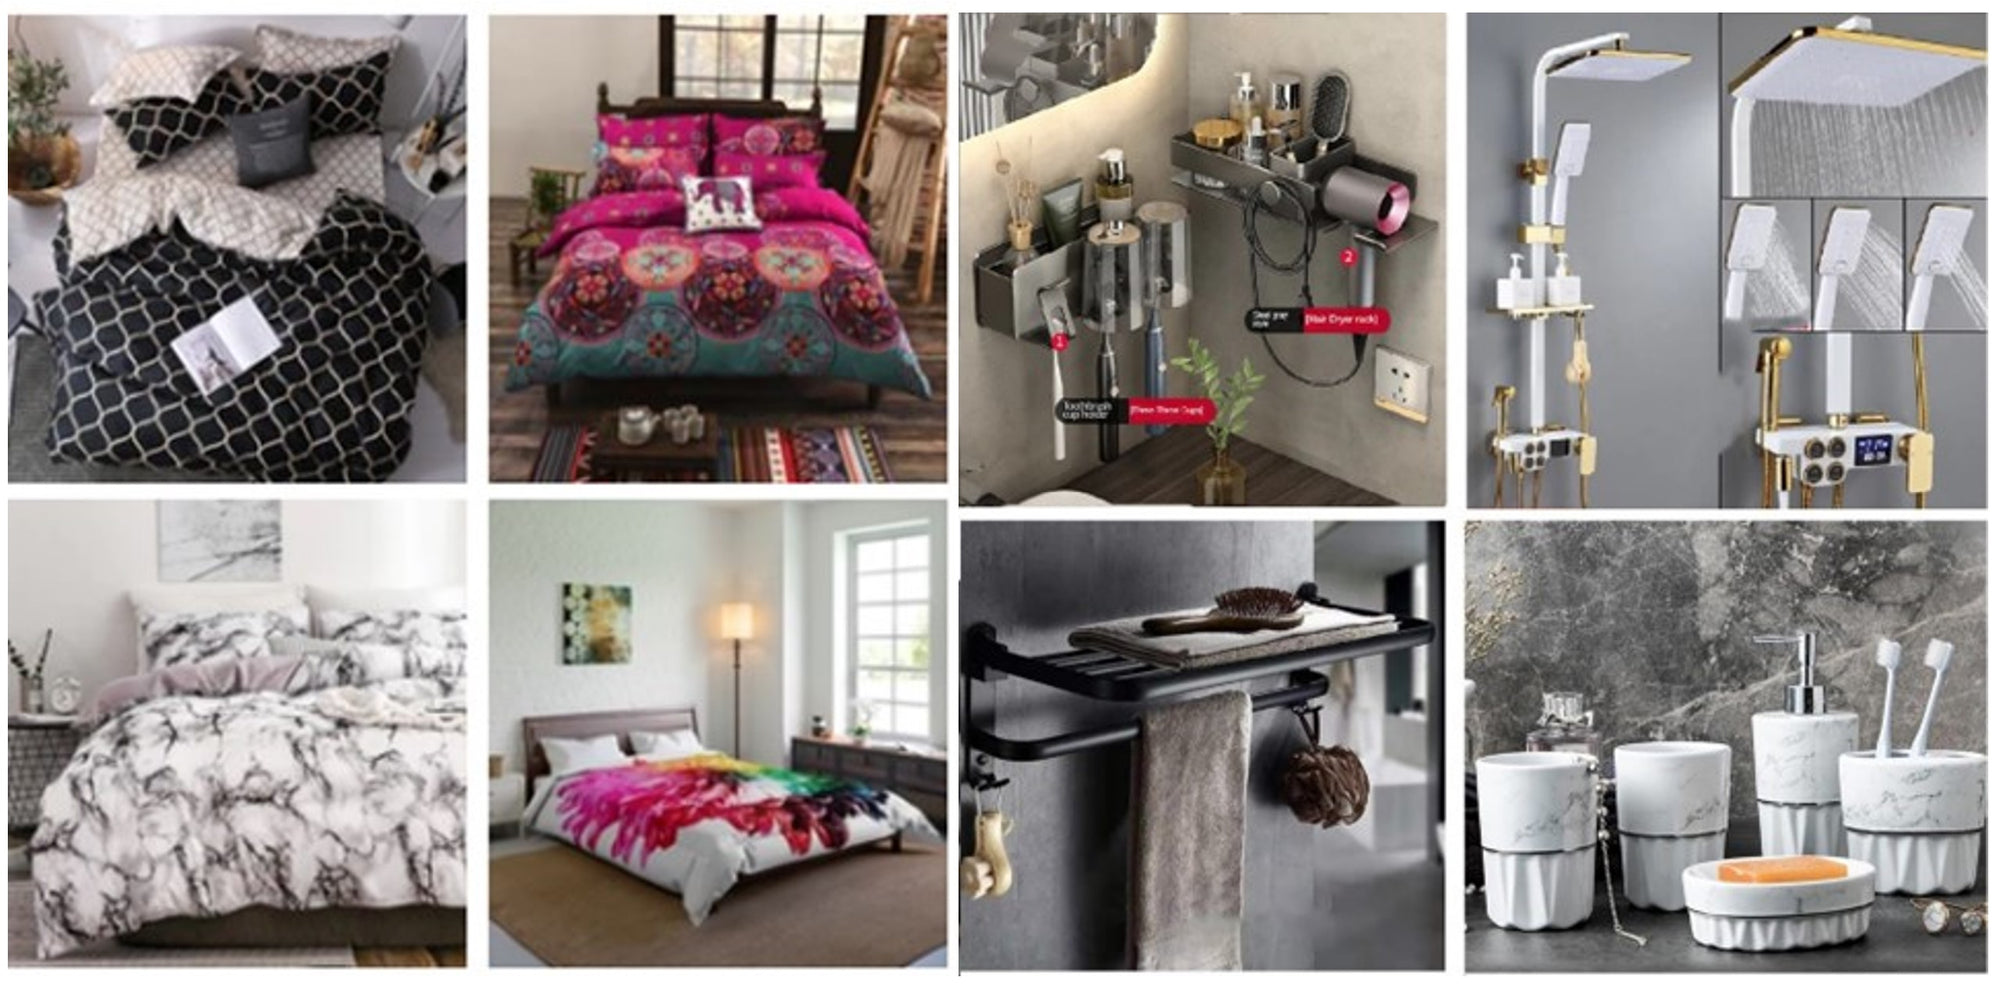 Creating Luxurious Spaces with Affordable Home Decor from Lush Homing